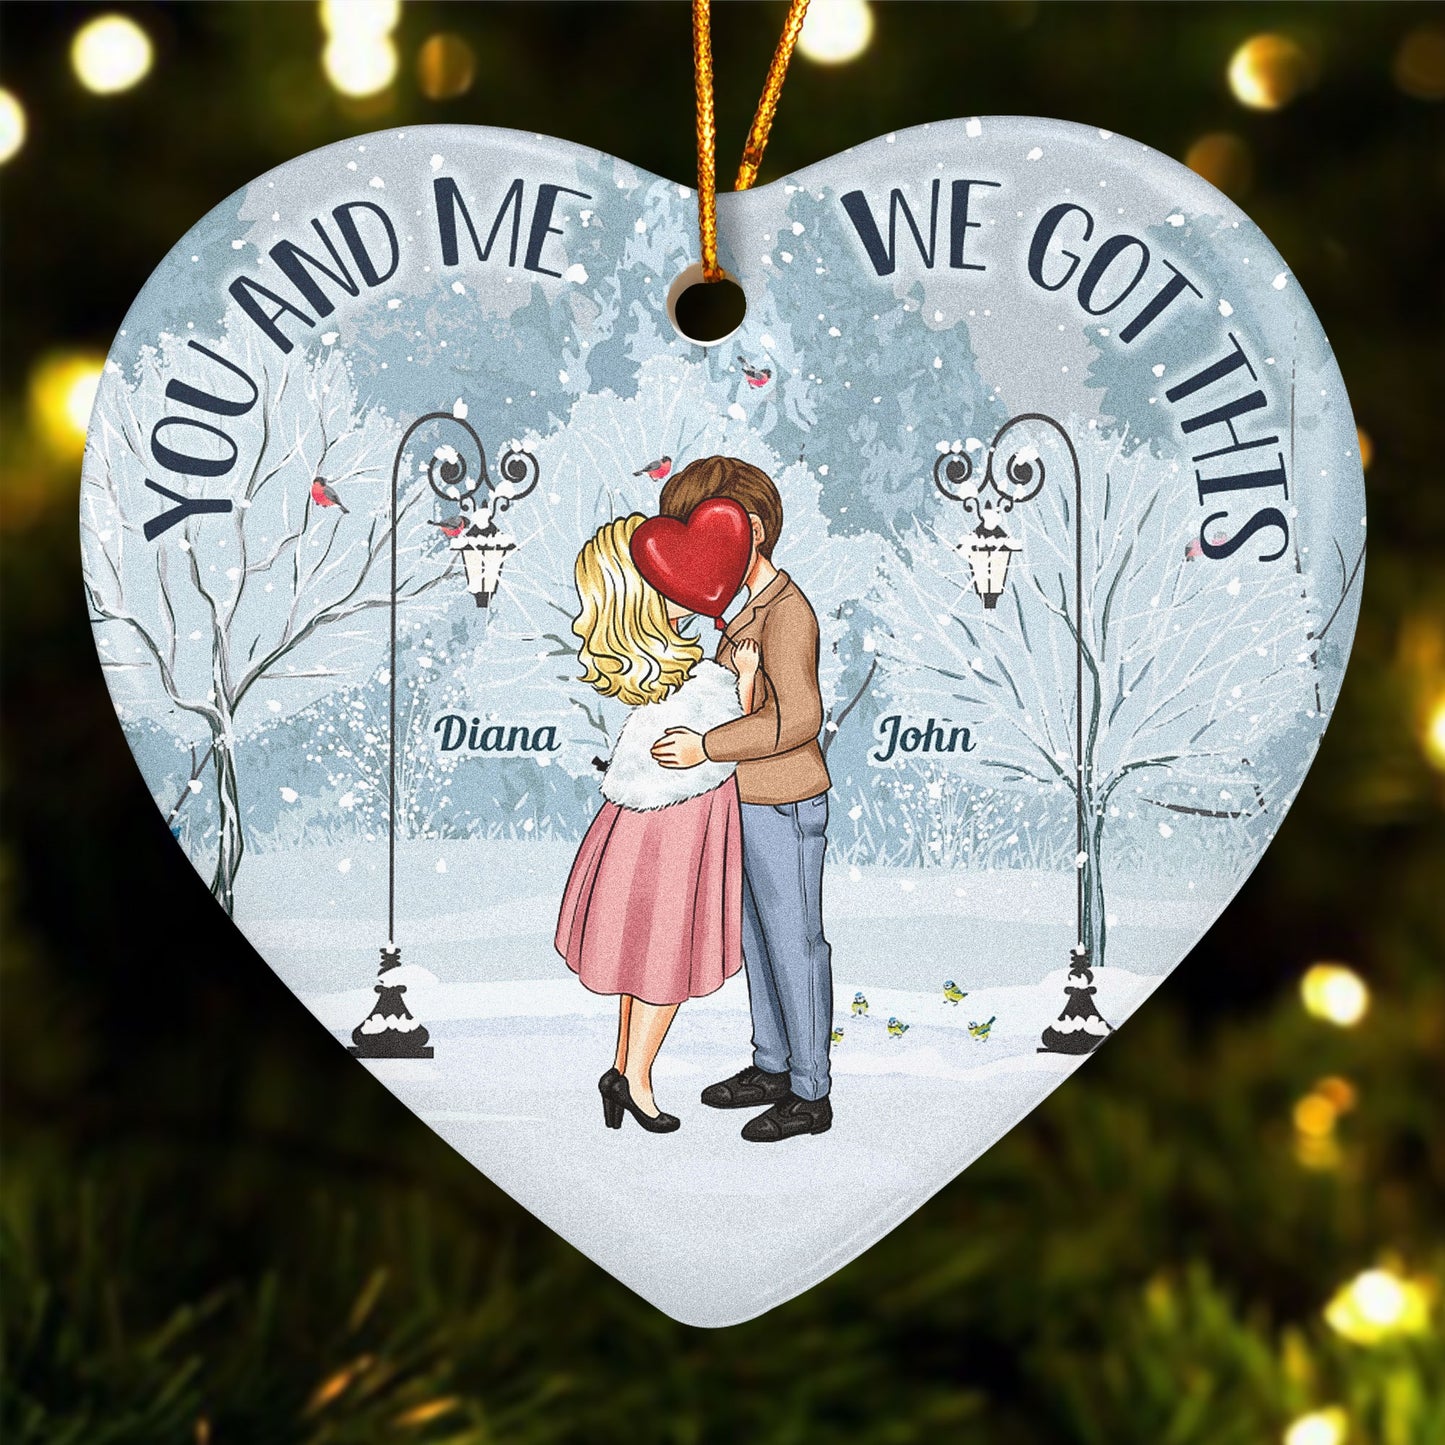 You And Me We Got This - Personalized Heart Shaped Ceramic Ornament